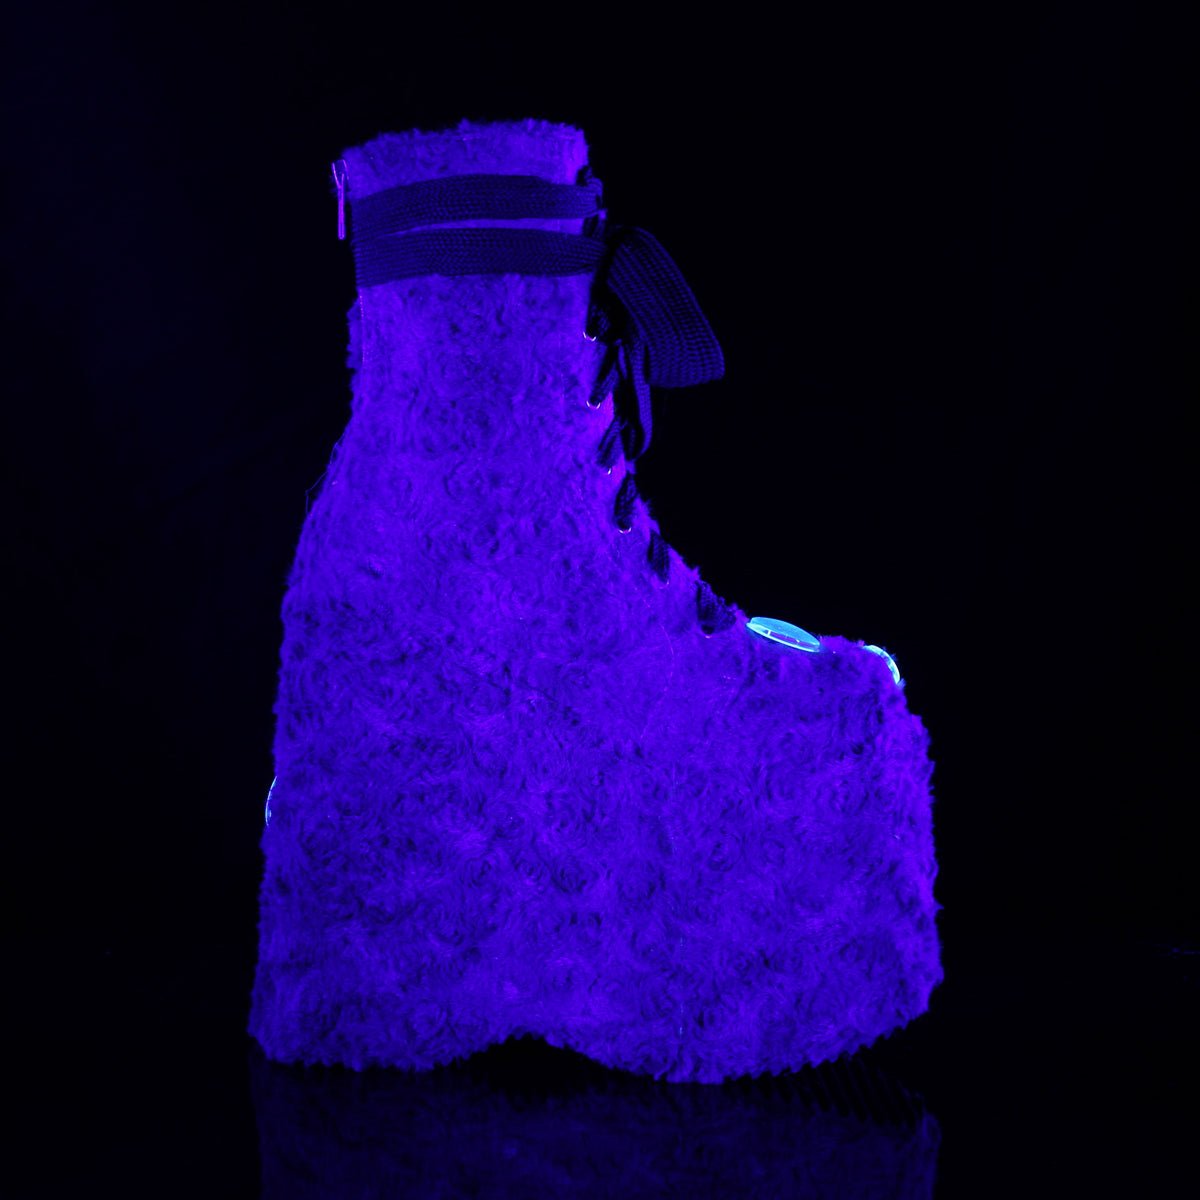 Too Fast | Demonia Slay 206 | Lime Green & Pink Faux Fur Women's Ankle Boots